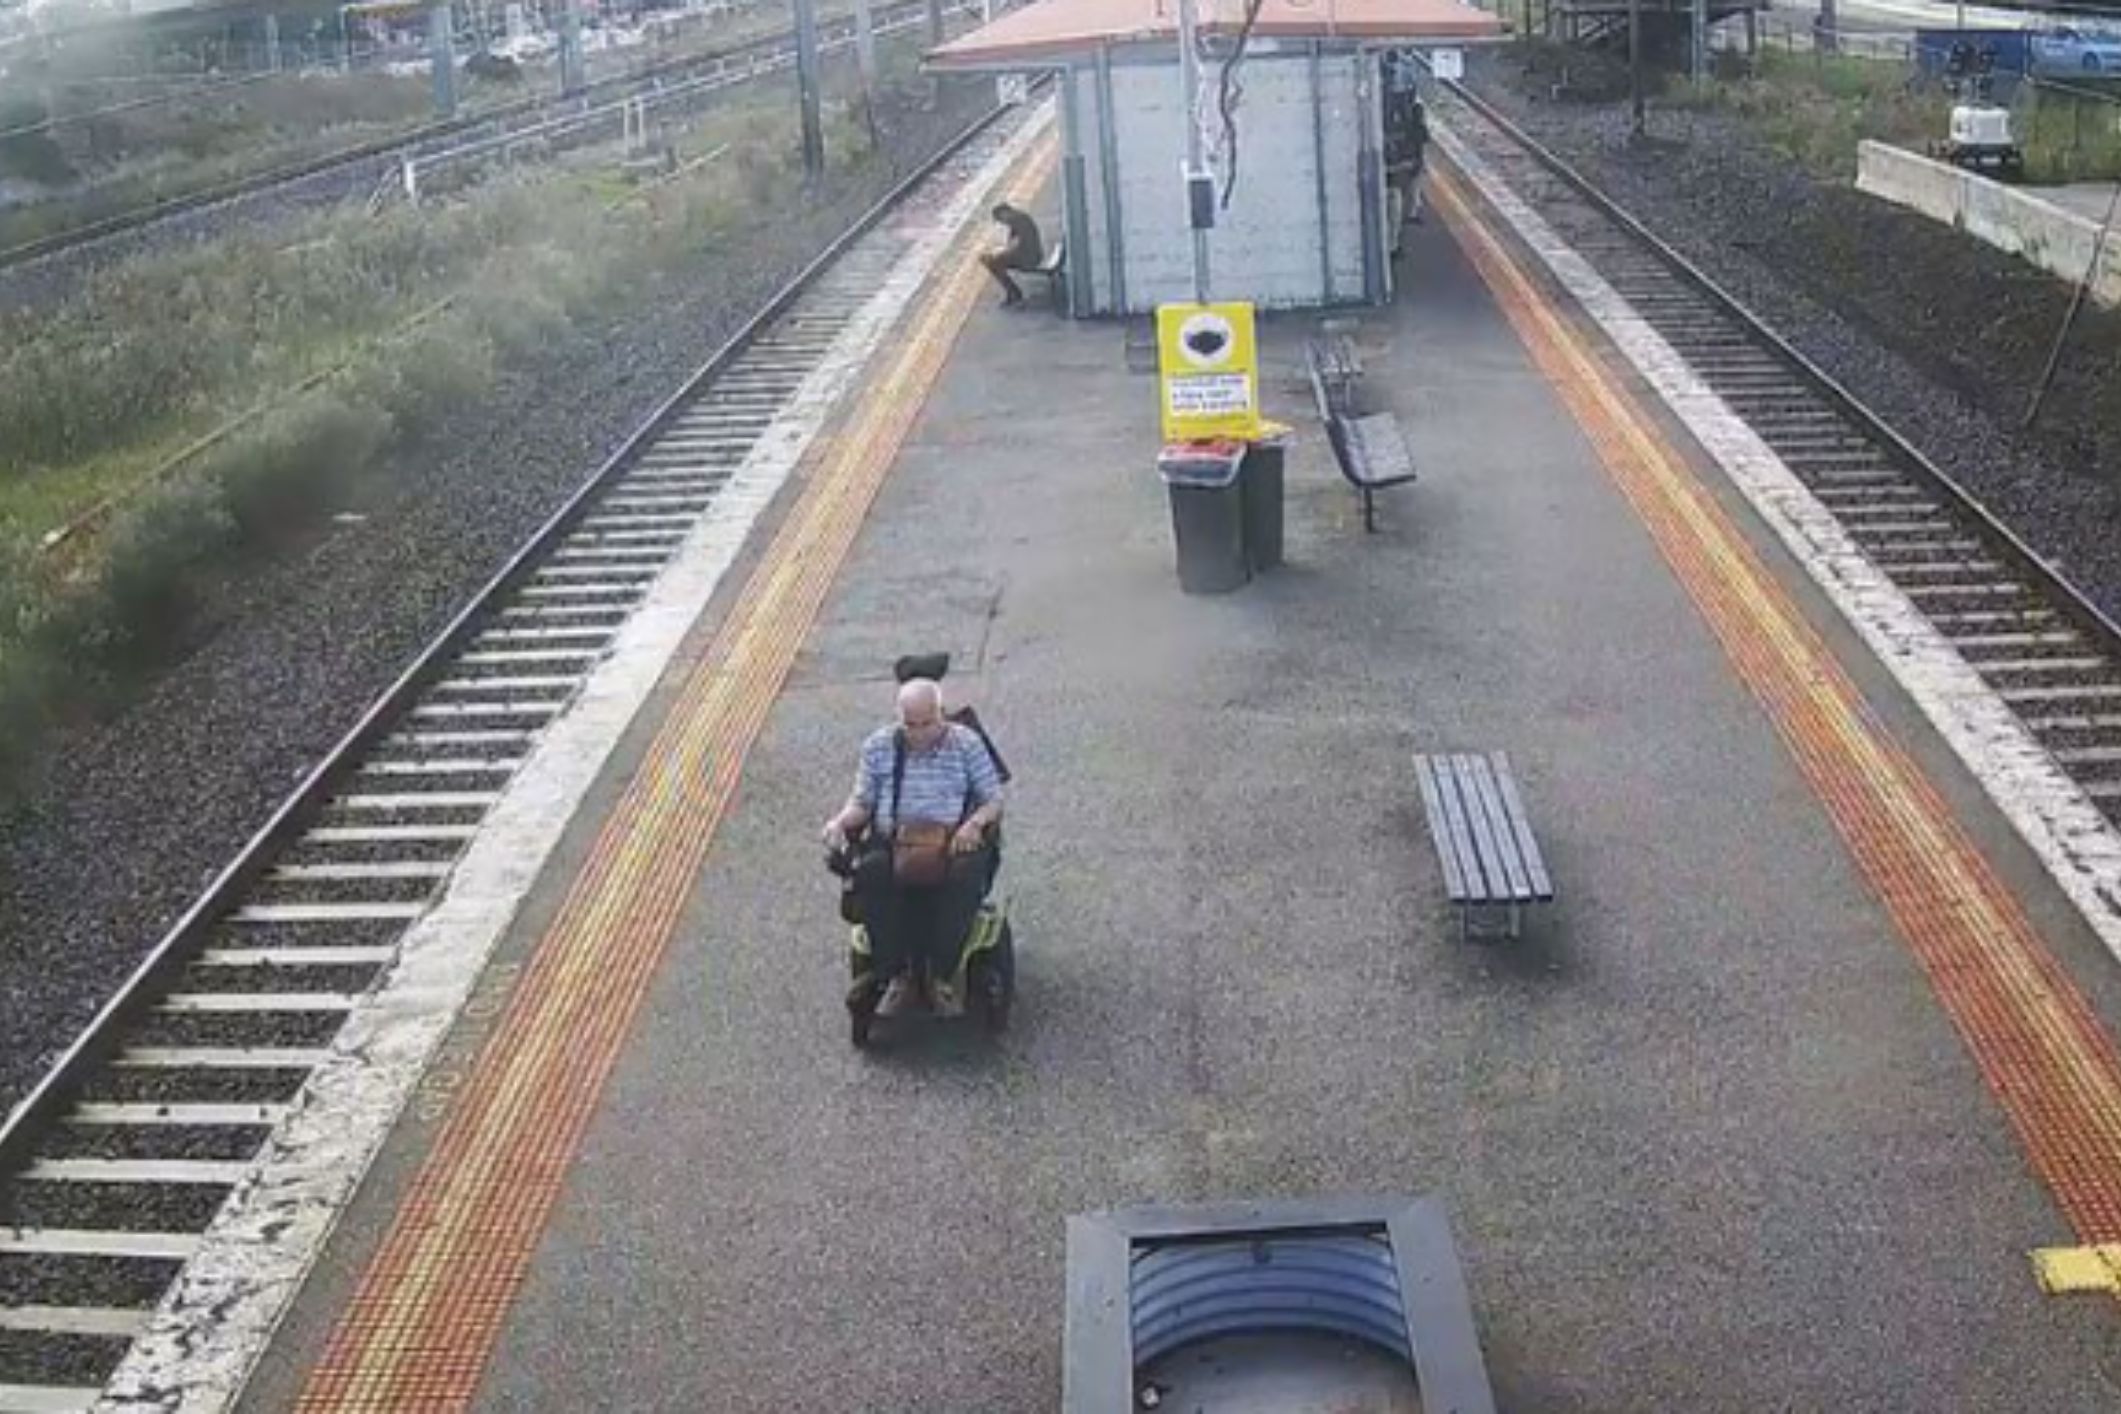 Search for brave strangers who leapt onto train tracks to rescue a man in wheelchair